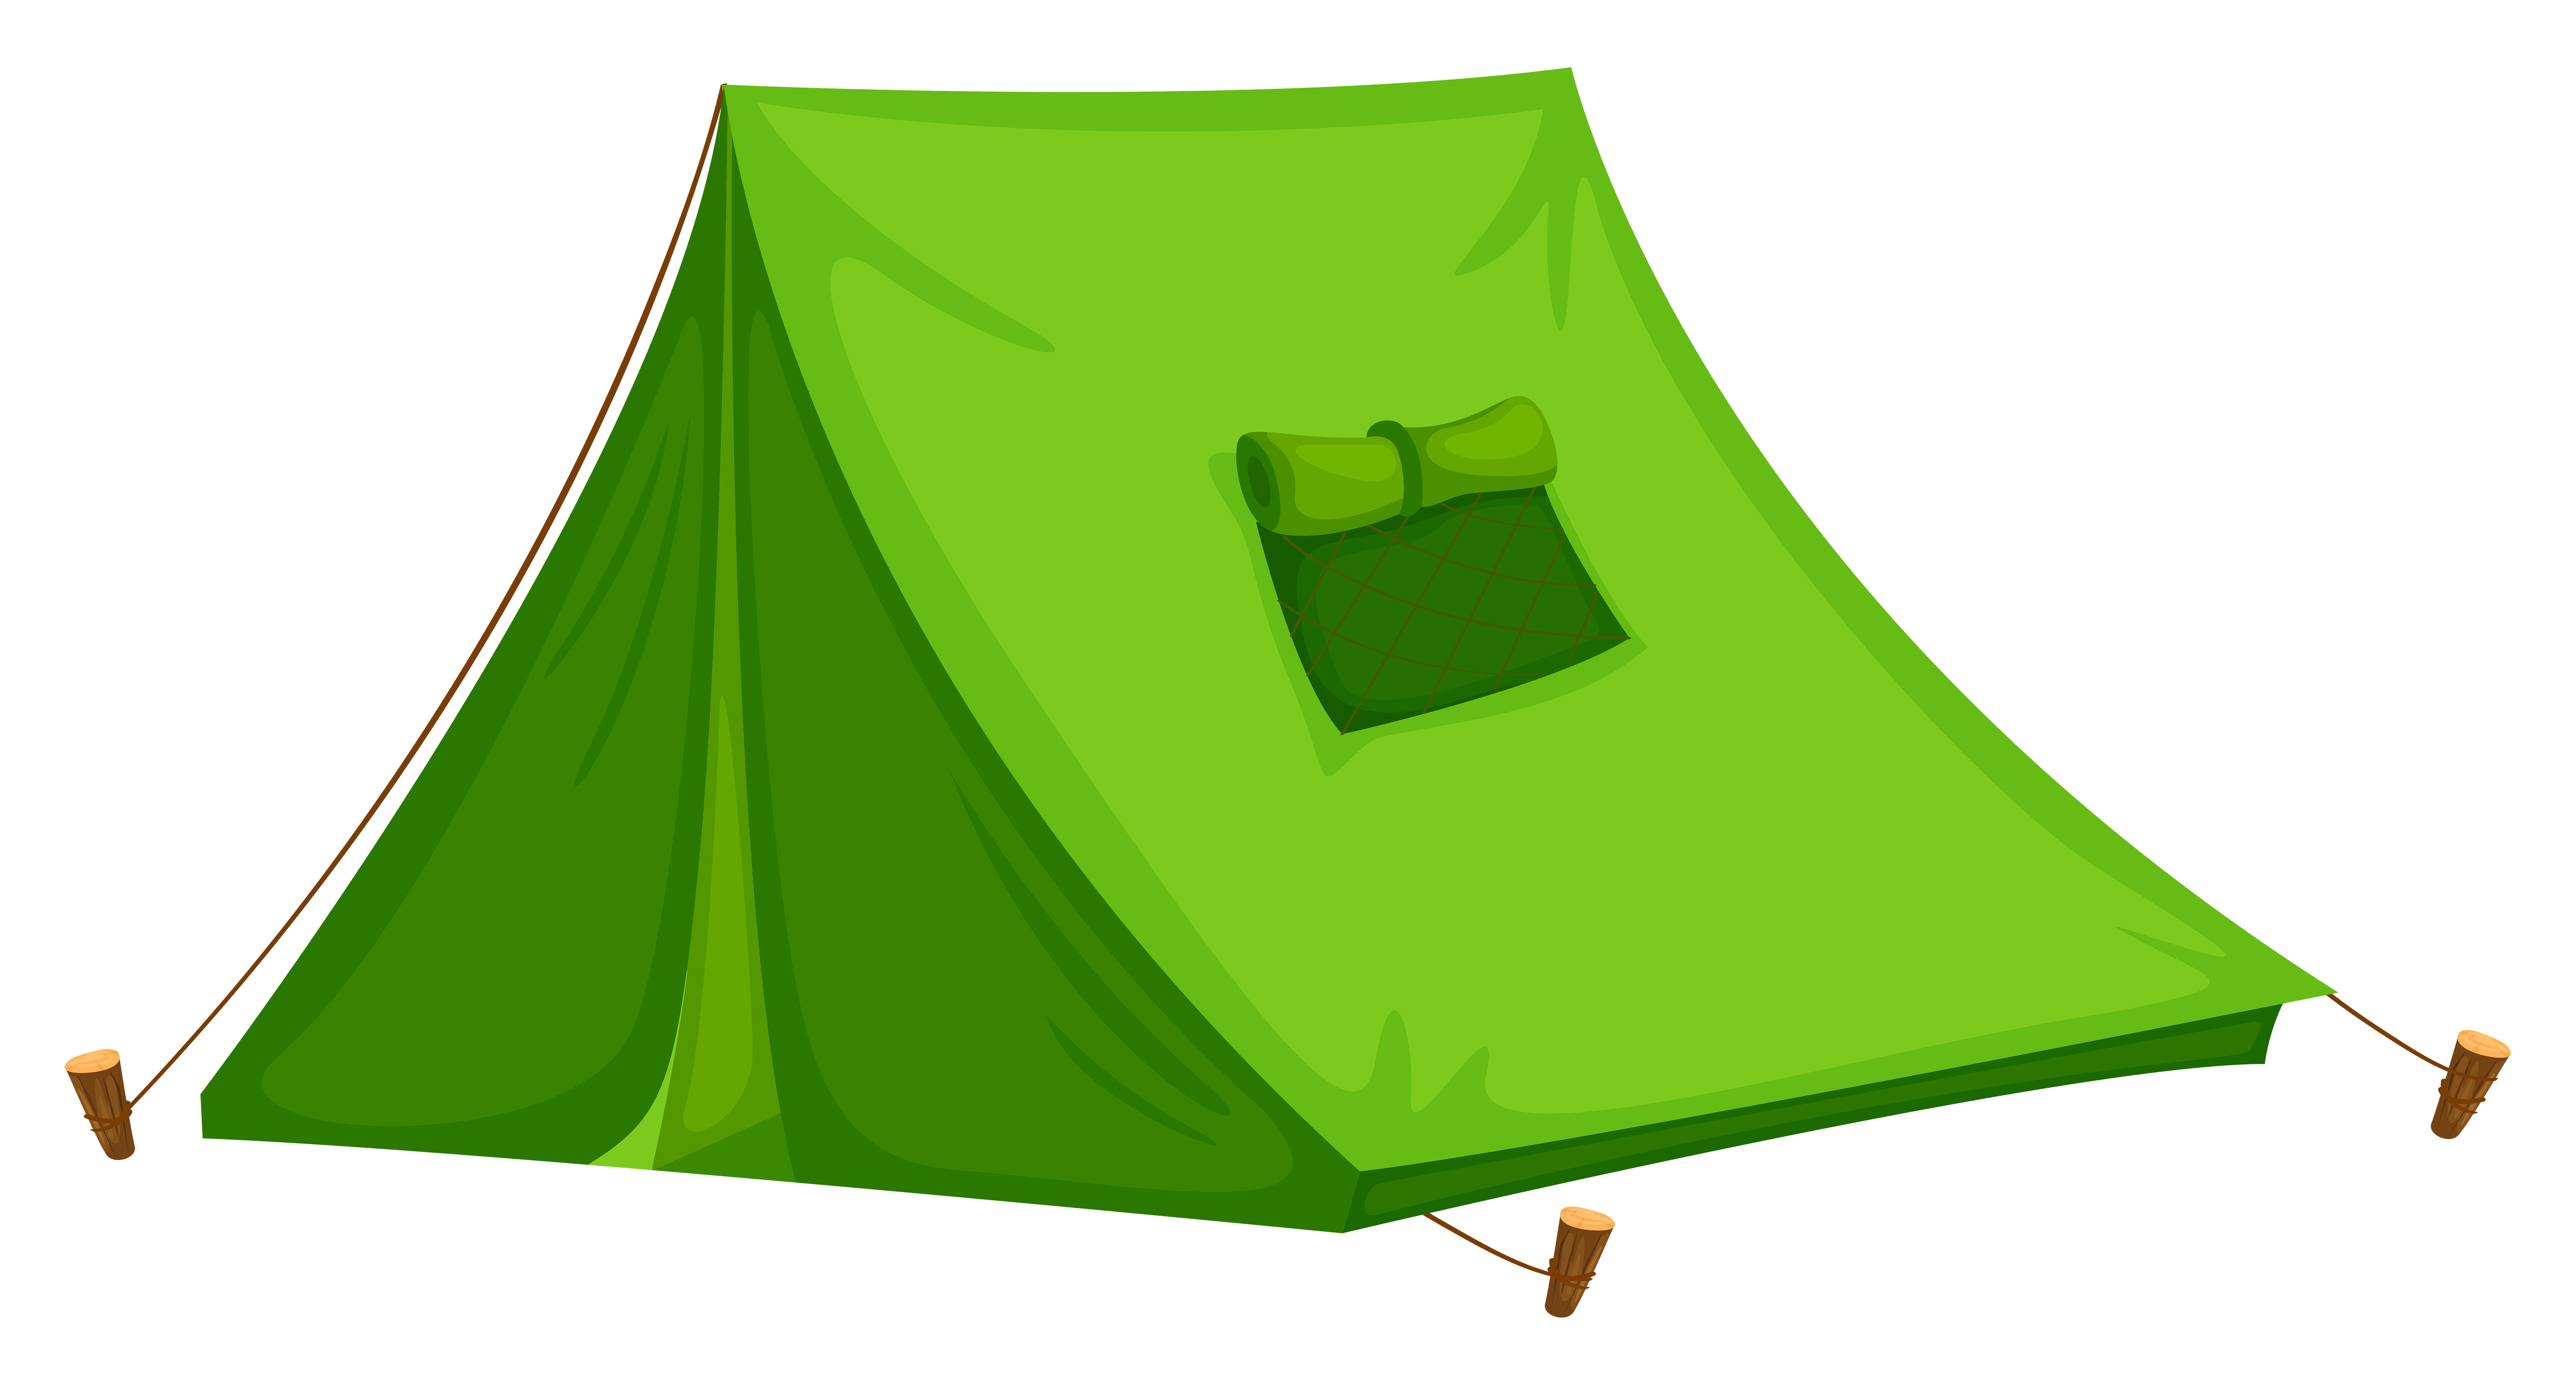 Tent camping clipart kid